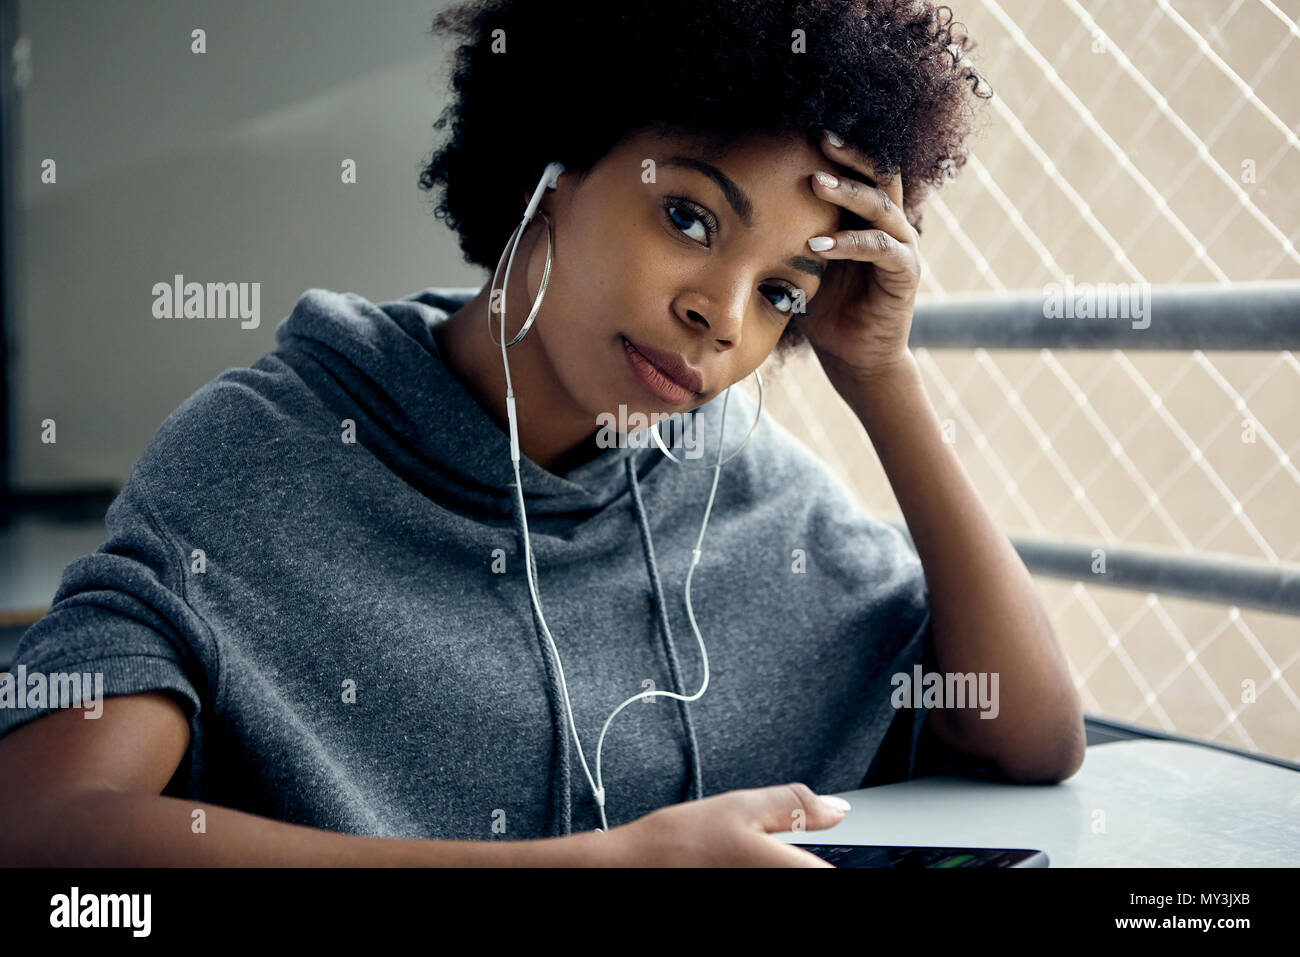 Young woman listening to earphones, holding head, portrait Stock Photo